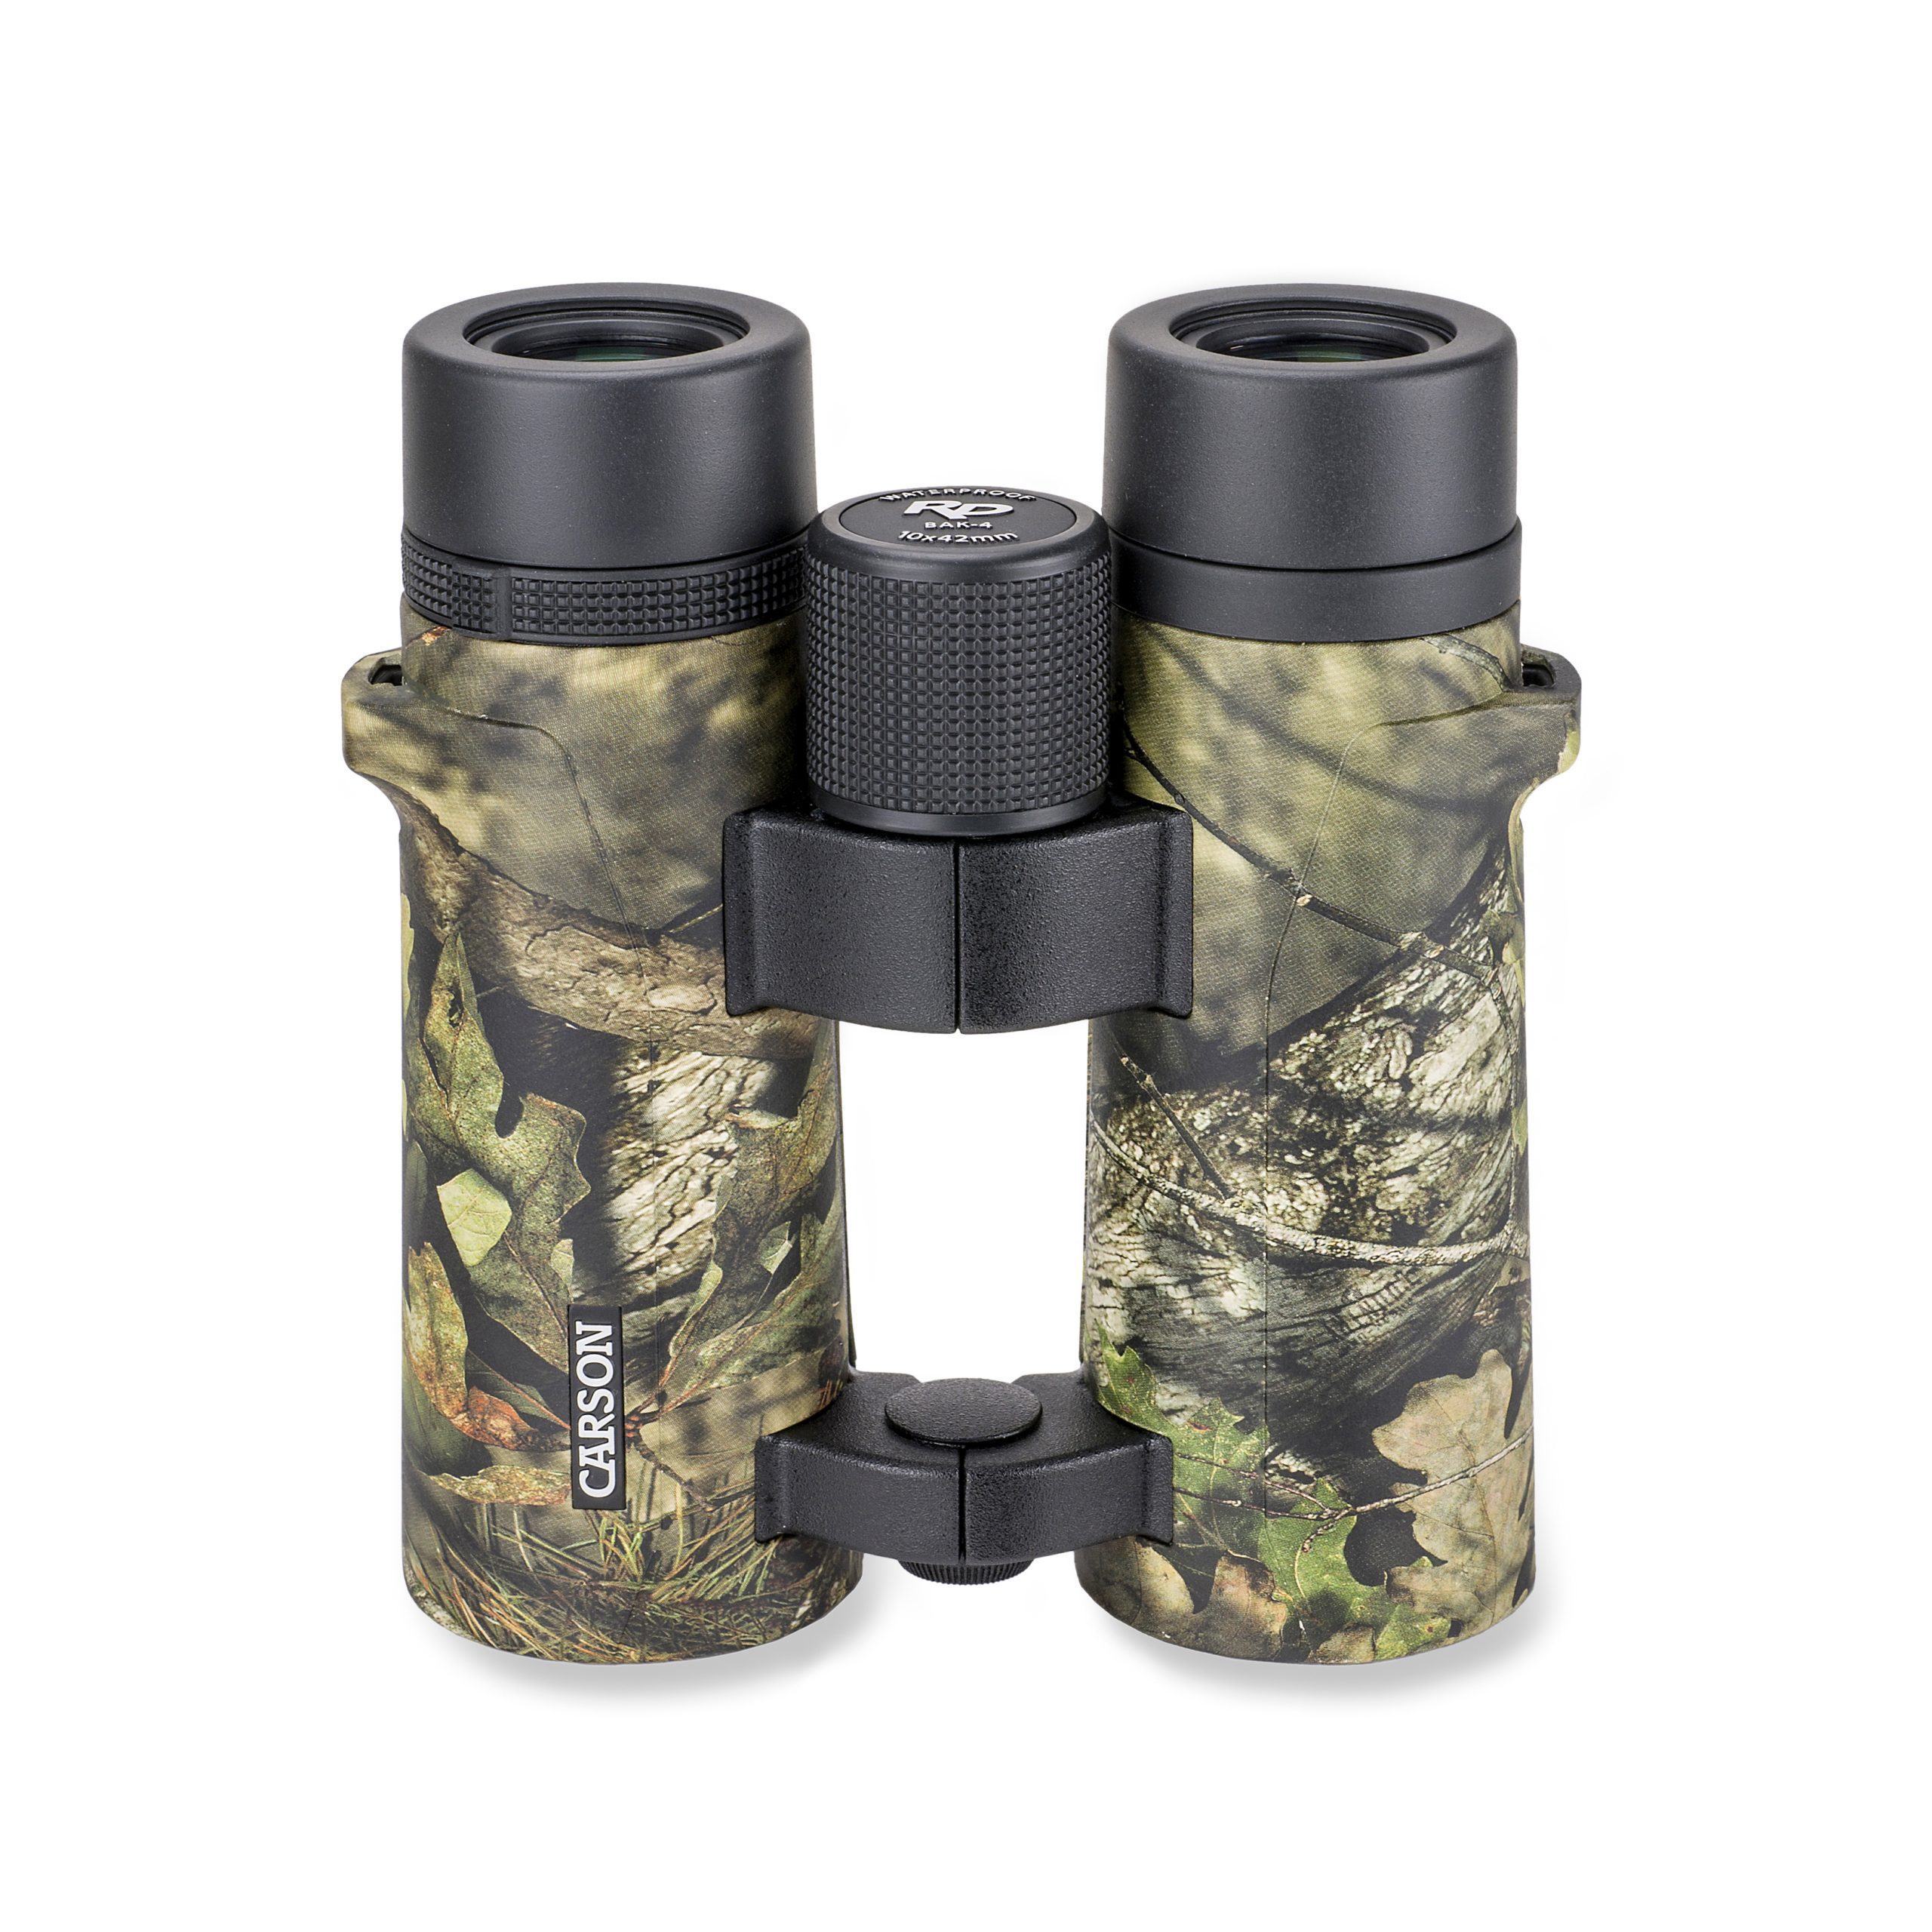 Carson RD Series Open-Bridge Compact and Full-Sized Waterproof High Definition Binoculars 